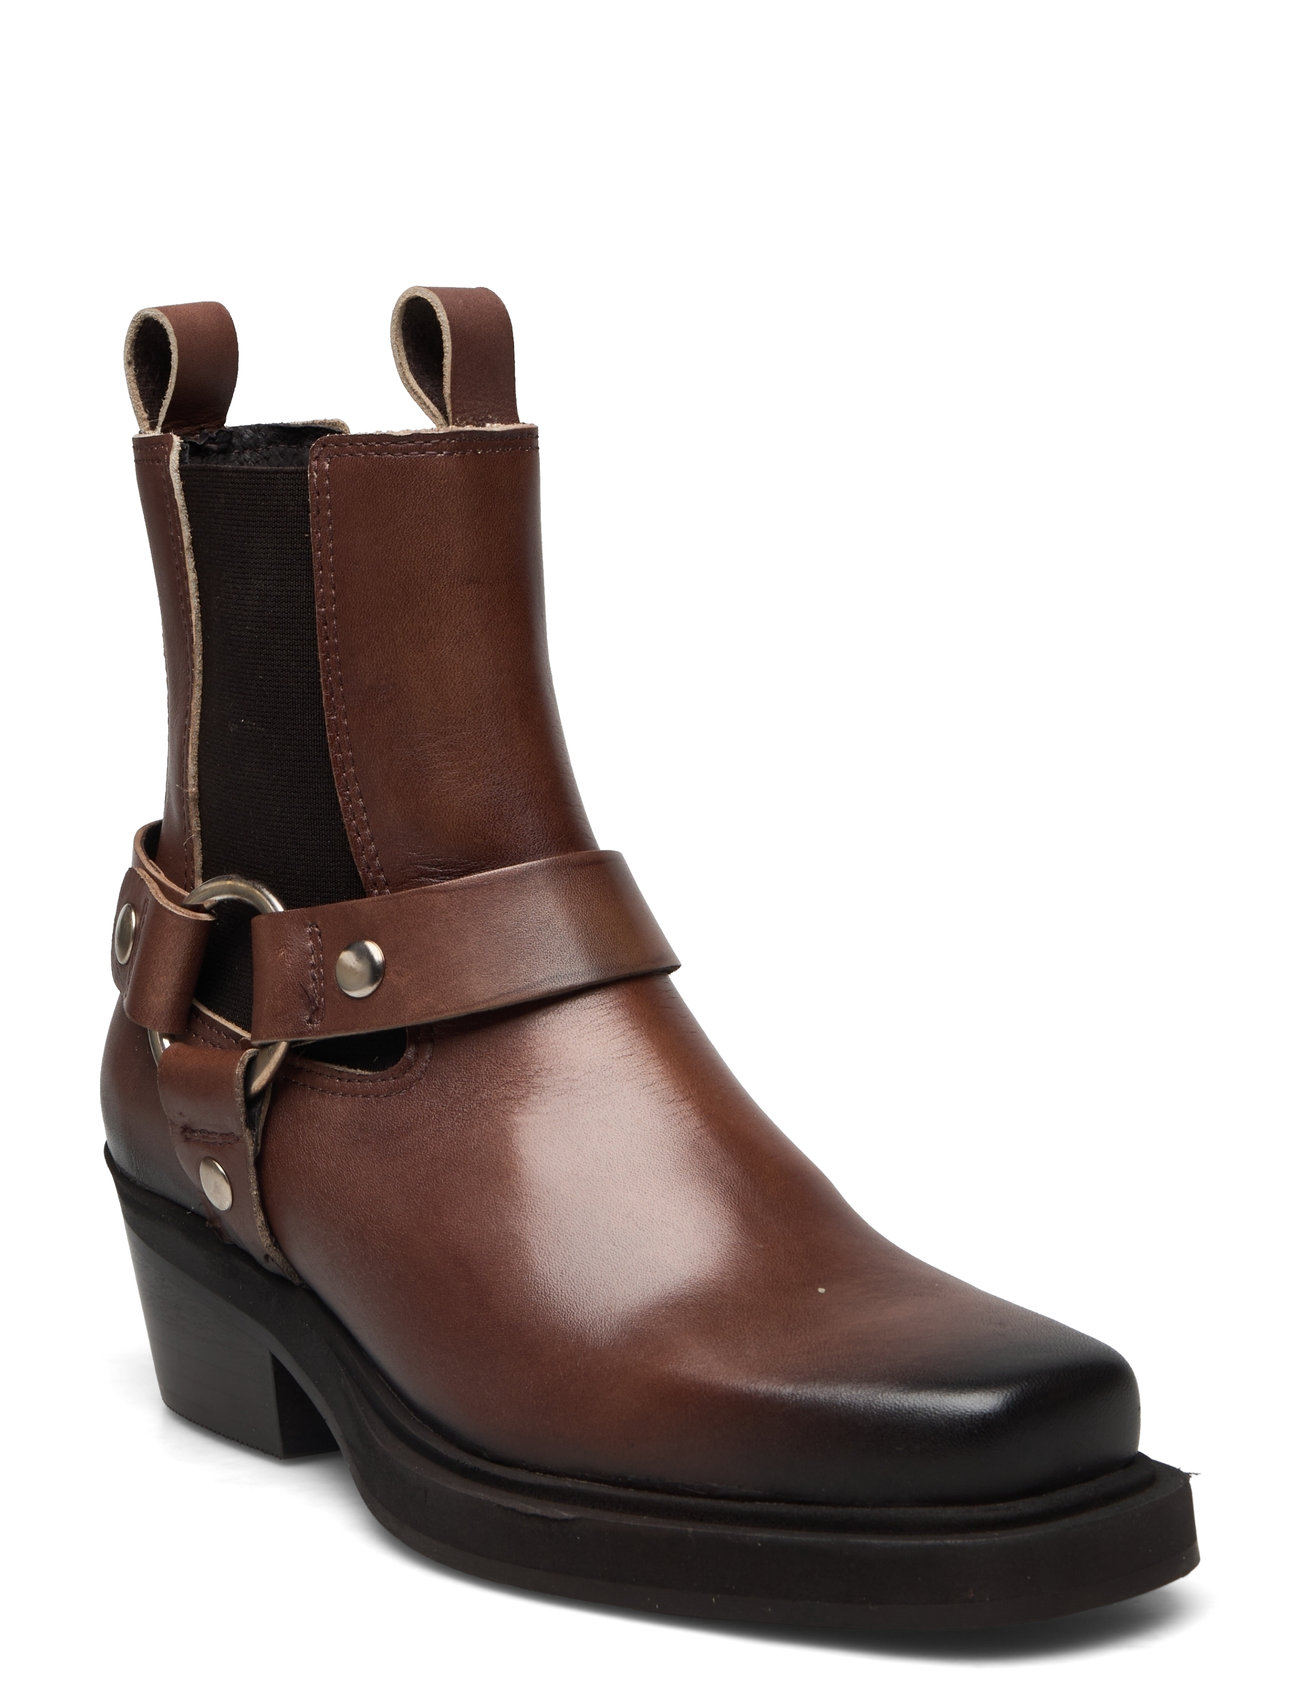 Dusty Buckle Two-T Shoes Boots Ankle Boots Ankle Boots With Heel Brown Pavement